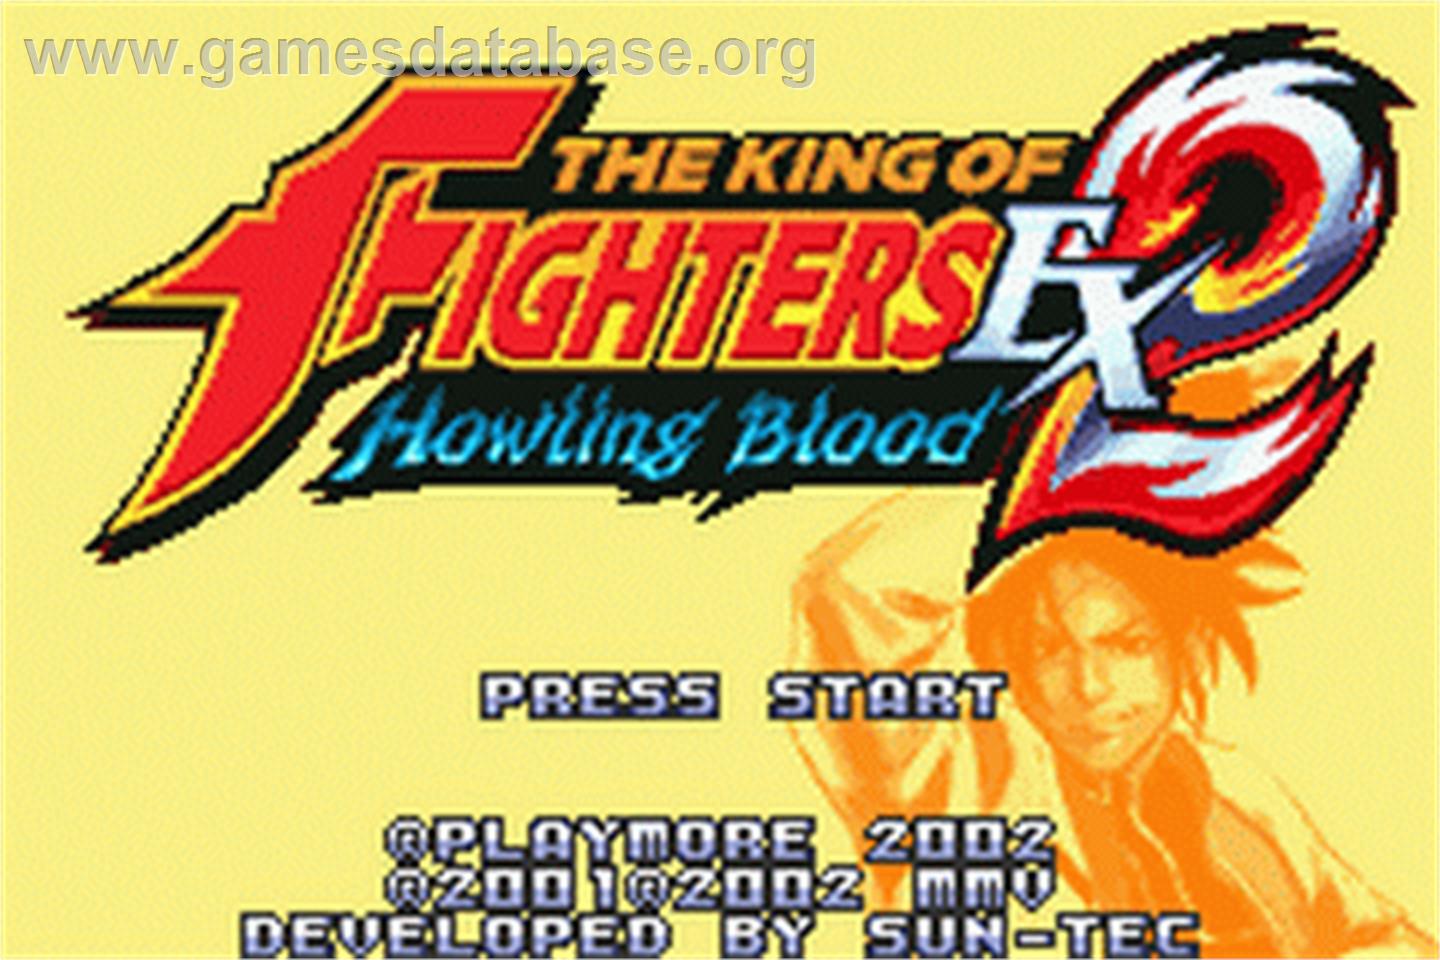 King of Fighters EX2: Howling Blood - Nintendo Game Boy Advance - Artwork - Title Screen